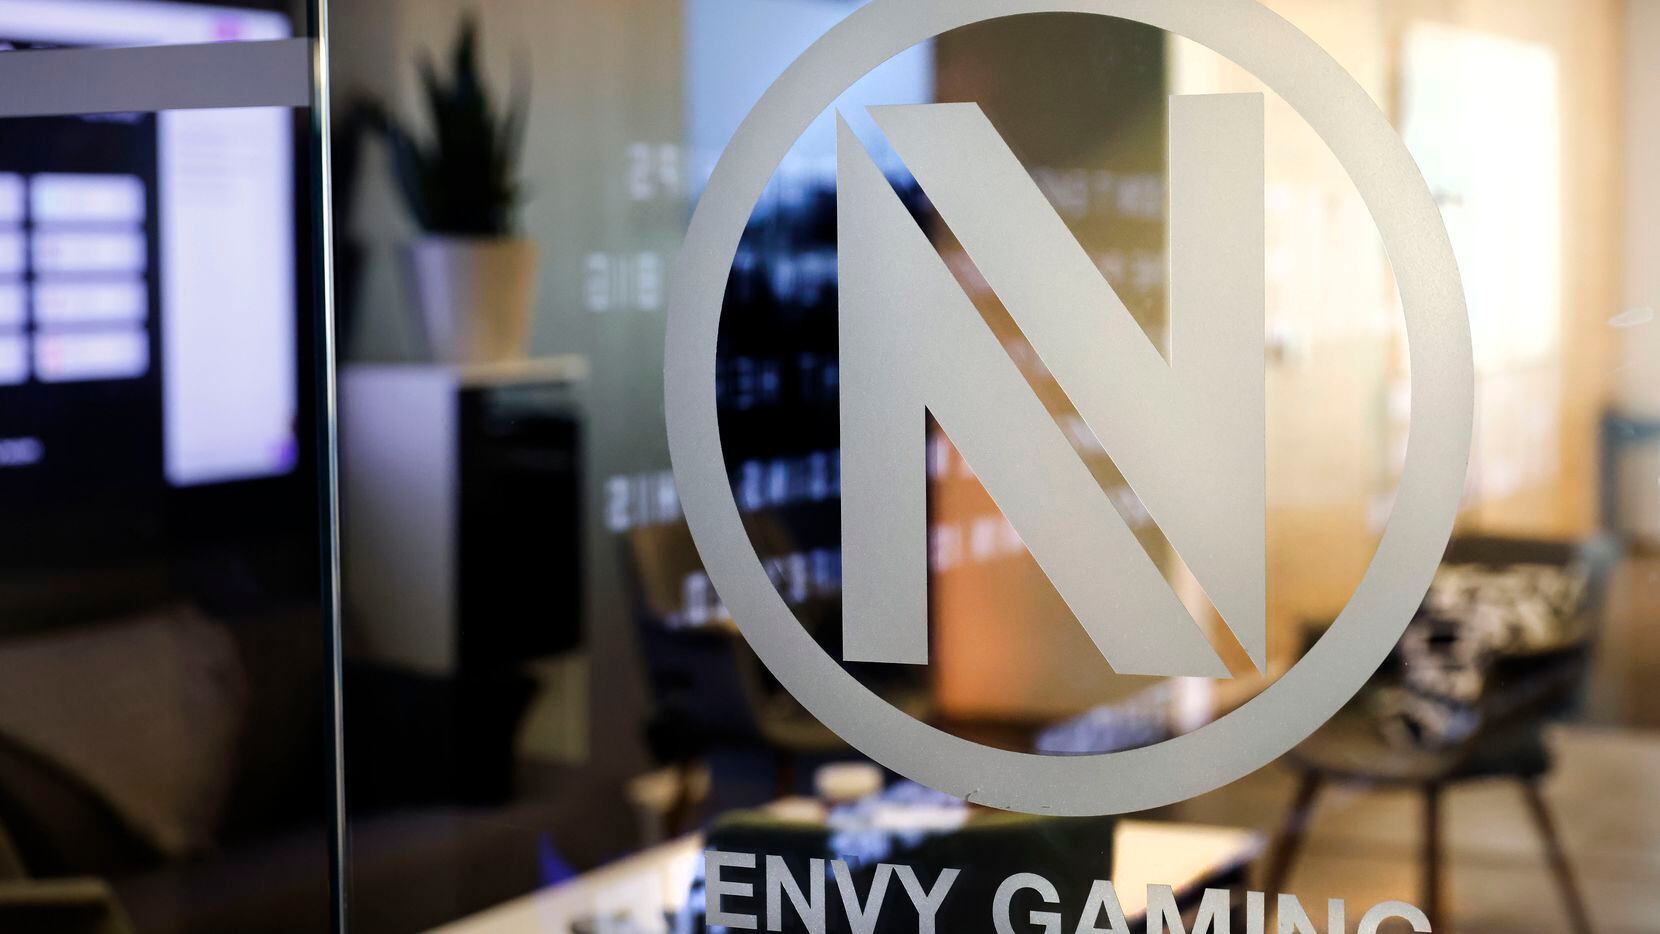 Envy Gaming is the owner and operator of global esports franchise Team Envy, the Dallas Fuel...